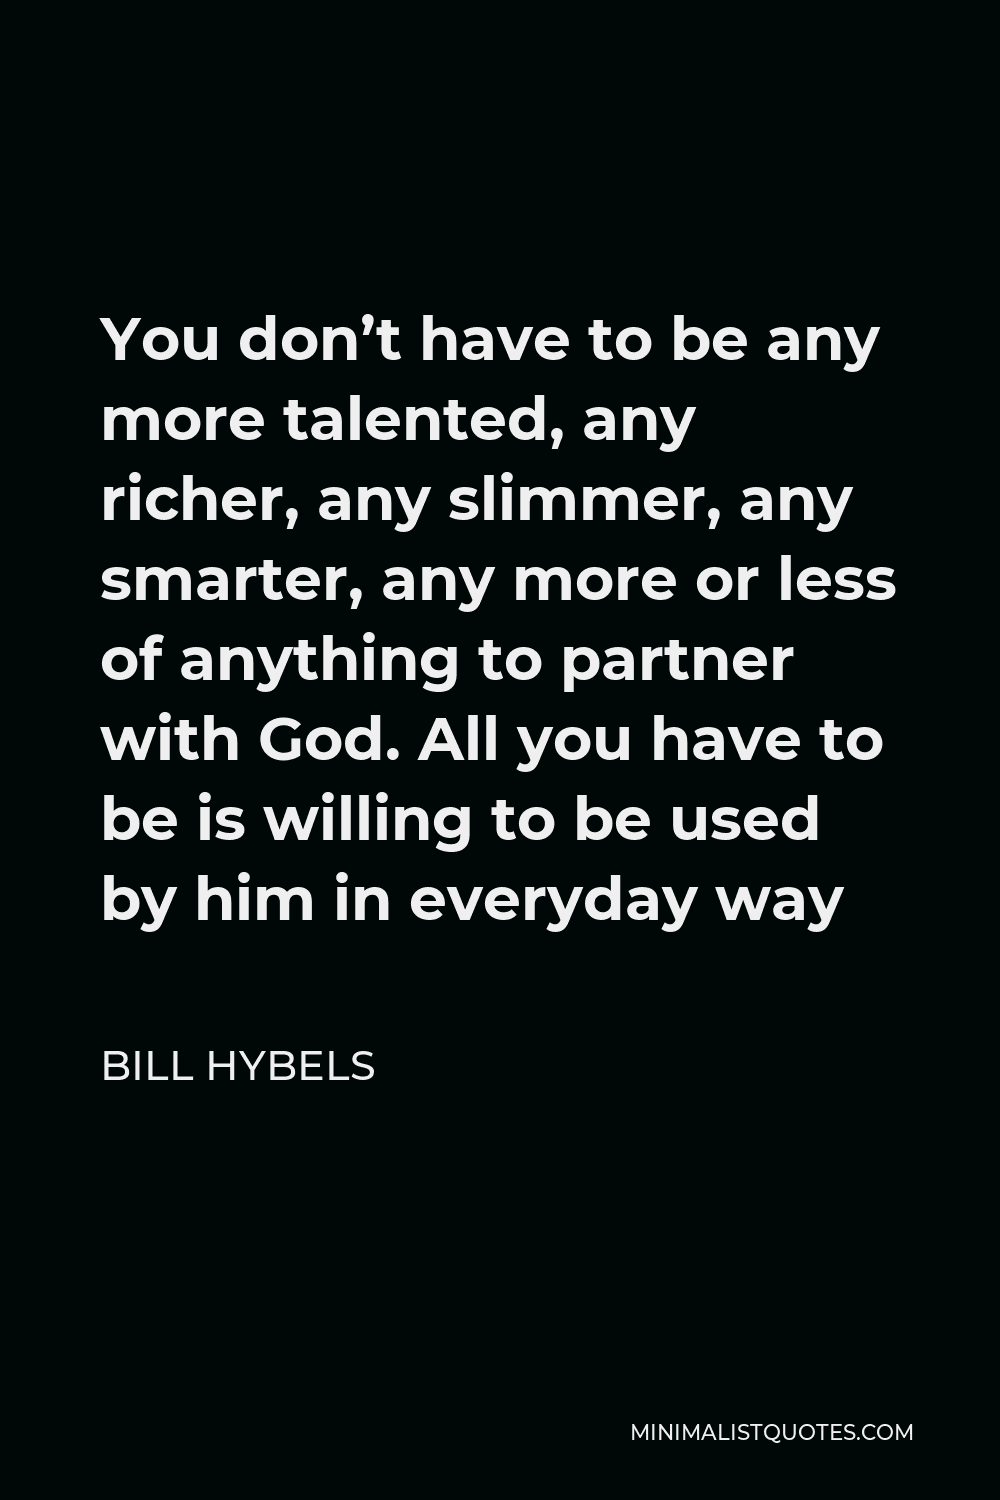 Bill Hybels Quote - You don’t have to be any more talented, any richer, any slimmer, any smarter, any more or less of anything to partner with God. All you have to be is willing to be used by him in everyday way